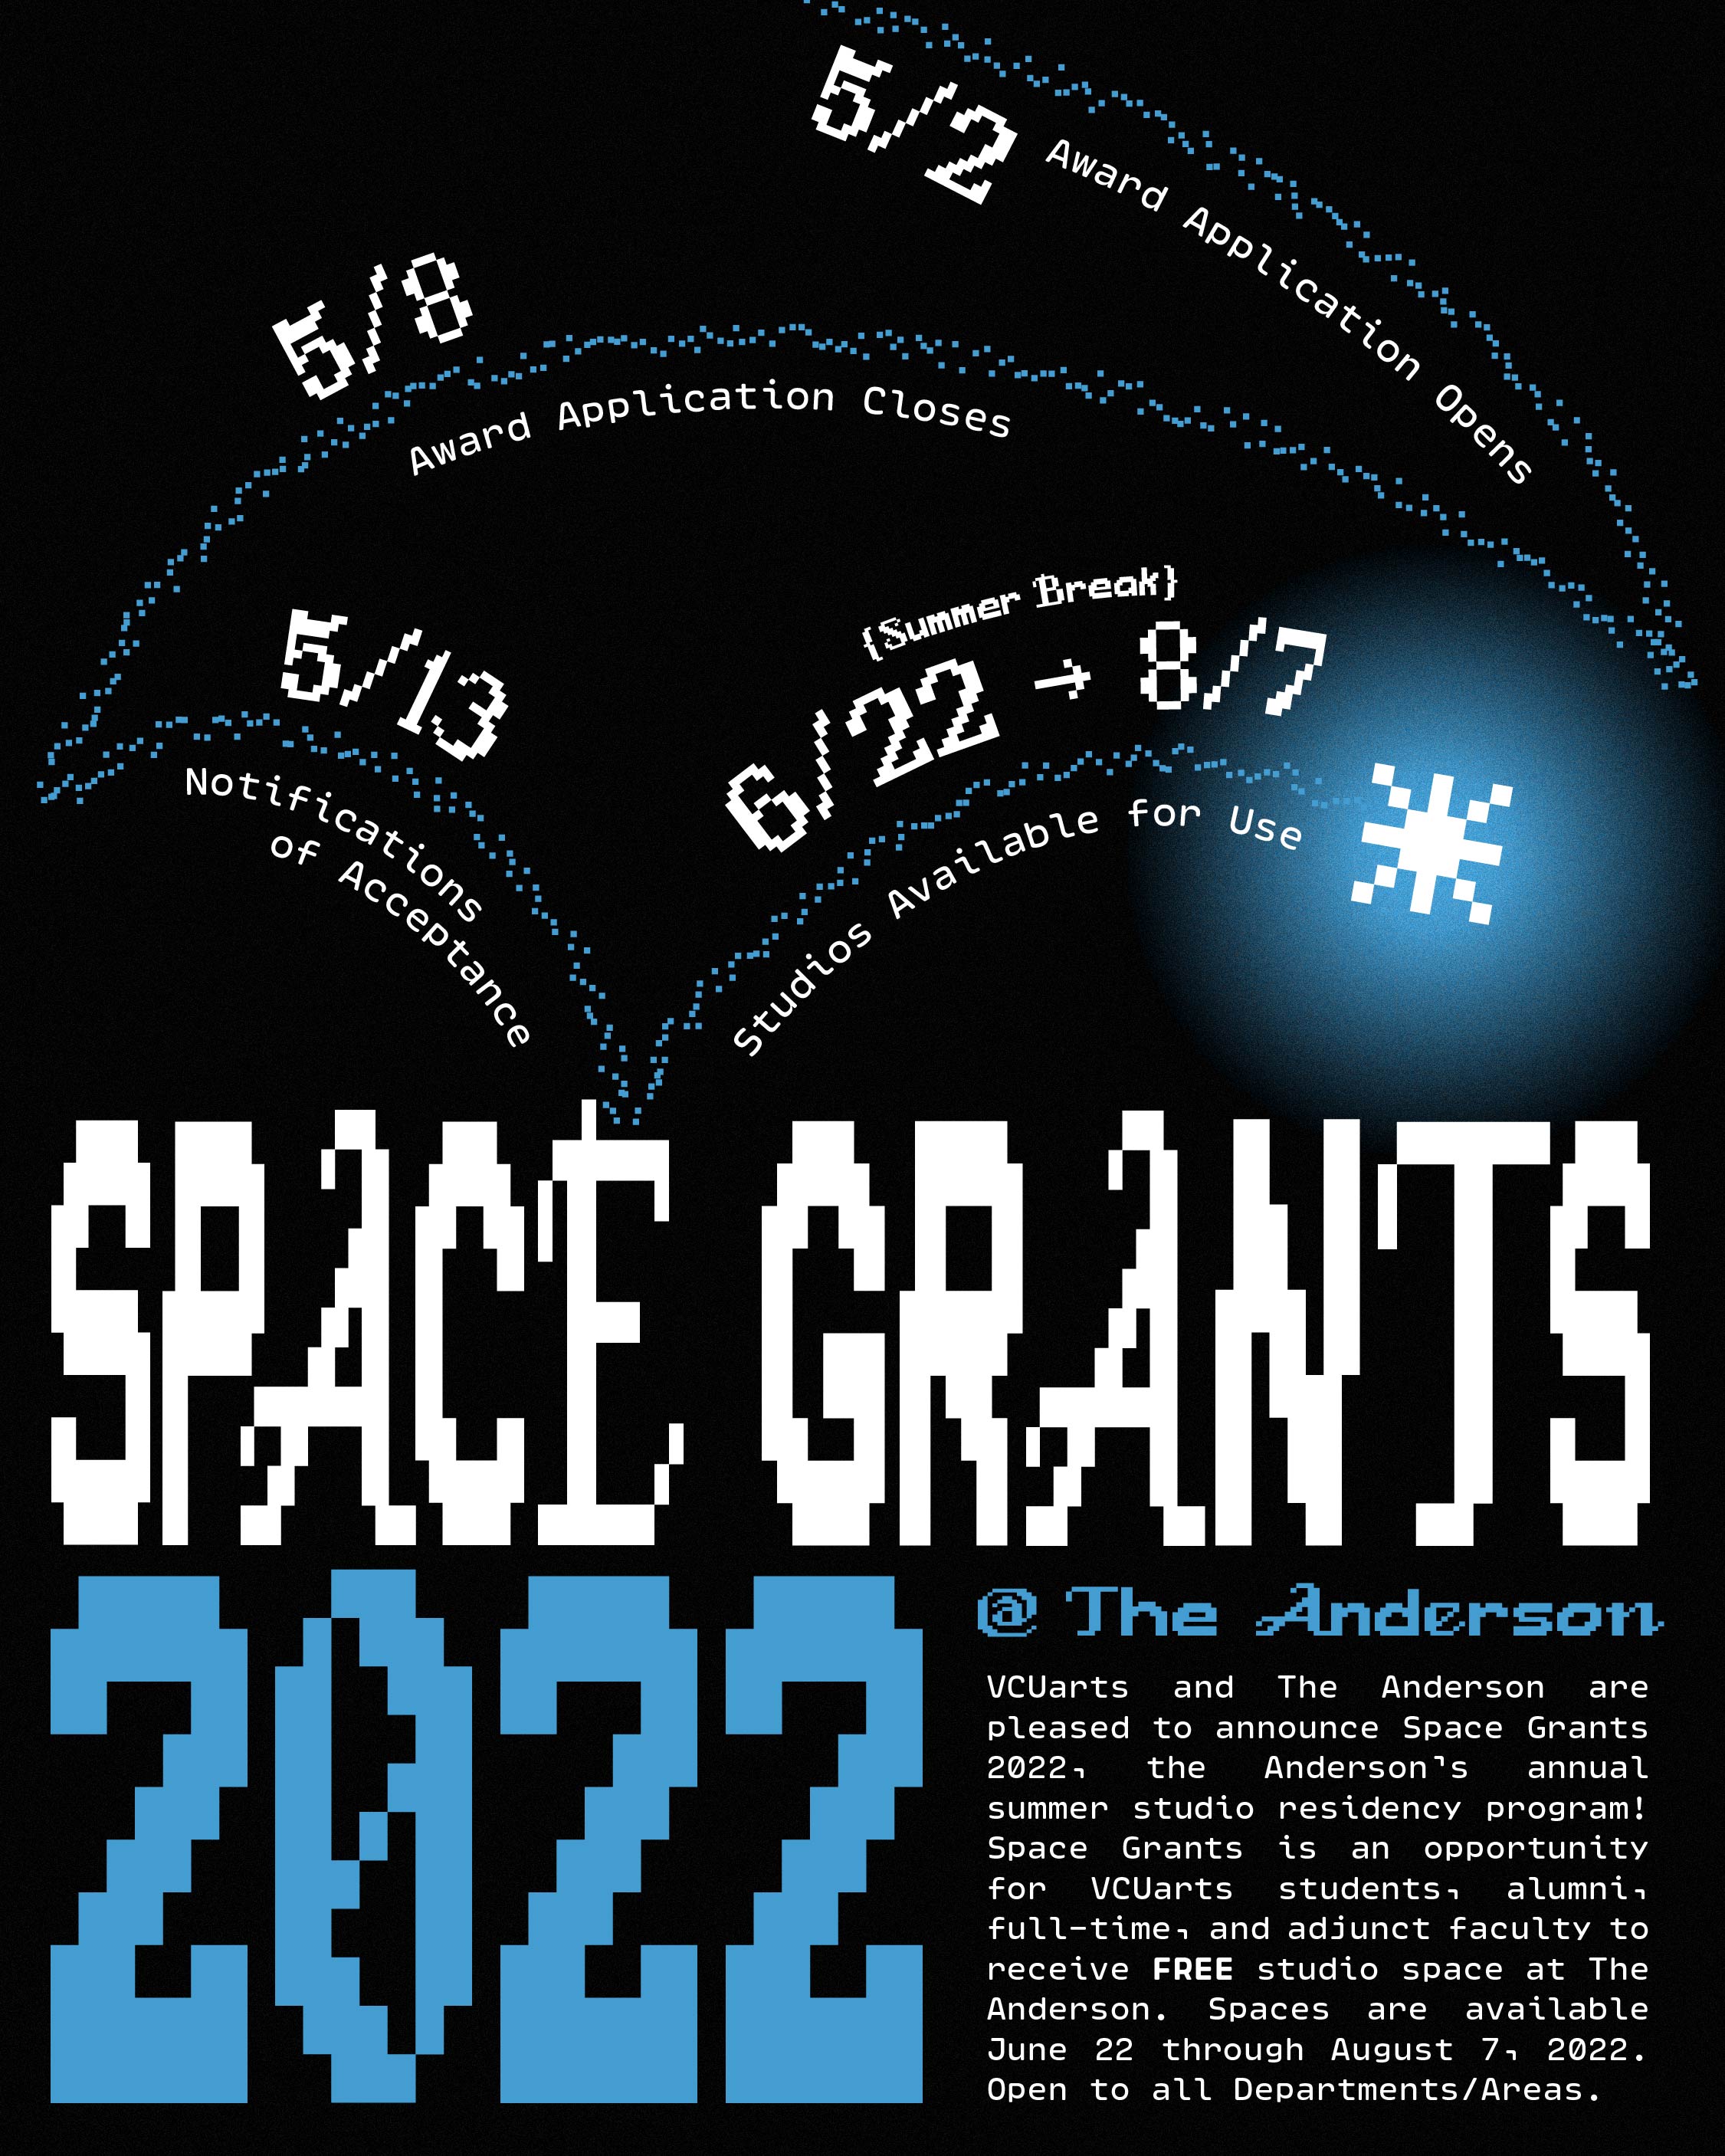 Poster with pixel type that is a blend of both serif and sans-serif in white and blue. There is a white, glowing pixel star with a blue dotted trail showing its path, originally coming in from the top edge and bouncing off the poster's edges and the text 'SPACE GRANTS 2022'. In the bottom right corner is smaller text describing the grant. Above, below, and along the blue trail are dates and timeline of the residency from open applications to studio availability.